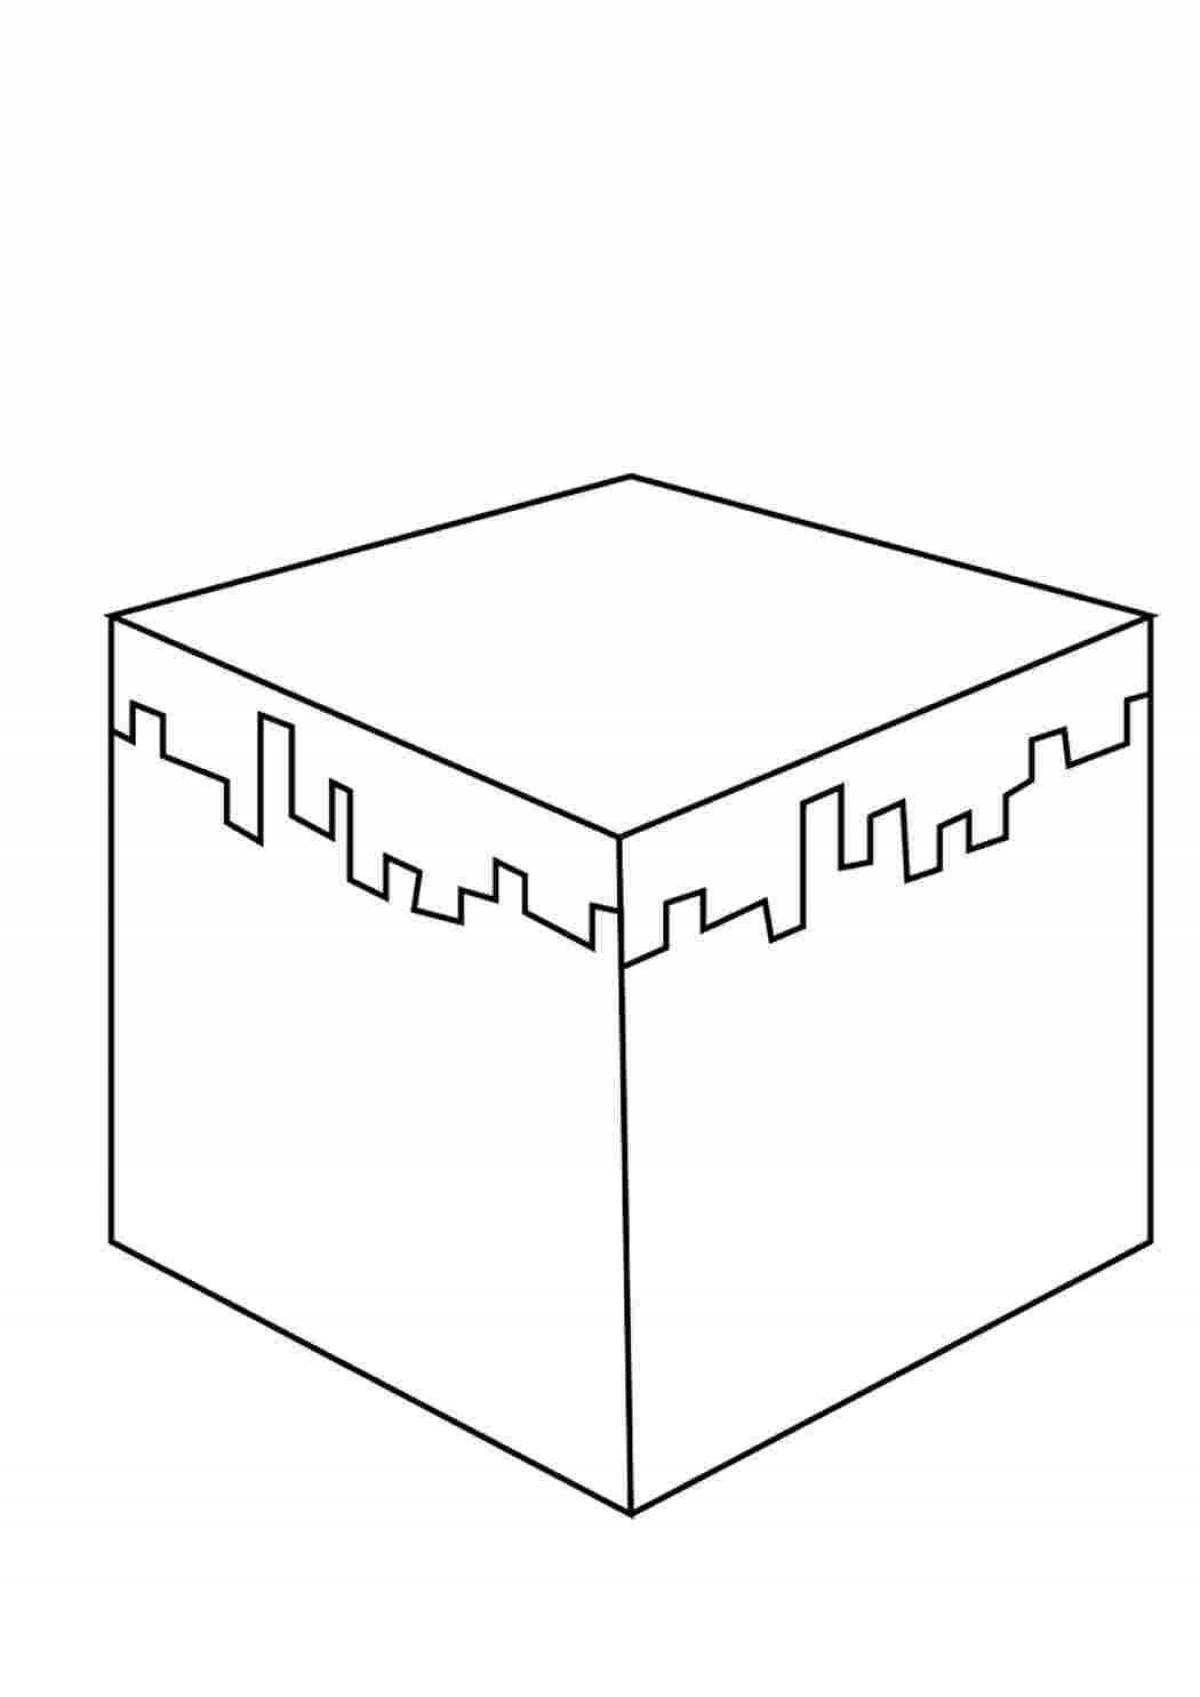 Funny minecraft chest coloring page